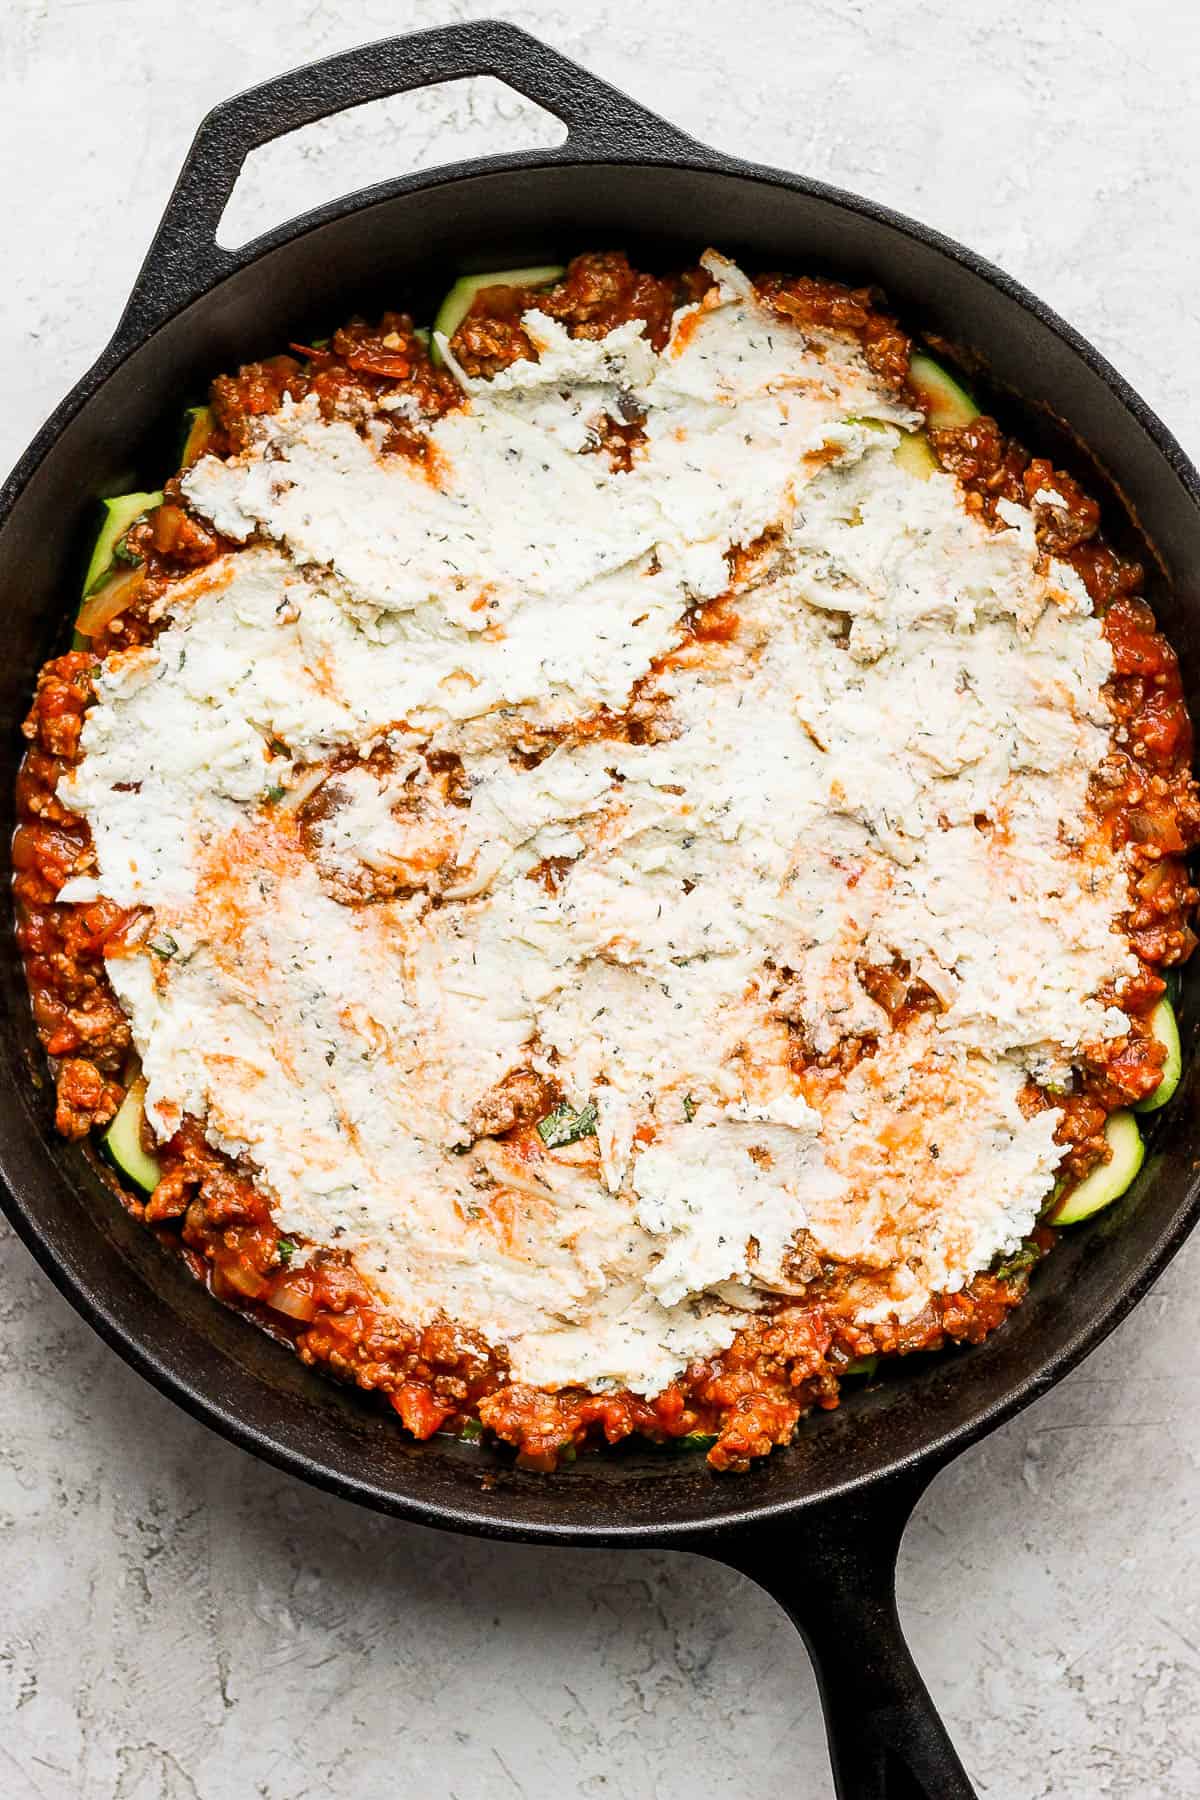 The ricotta cheese mixture spread evenly on top of the meat sauce in the cast iron skillet. 